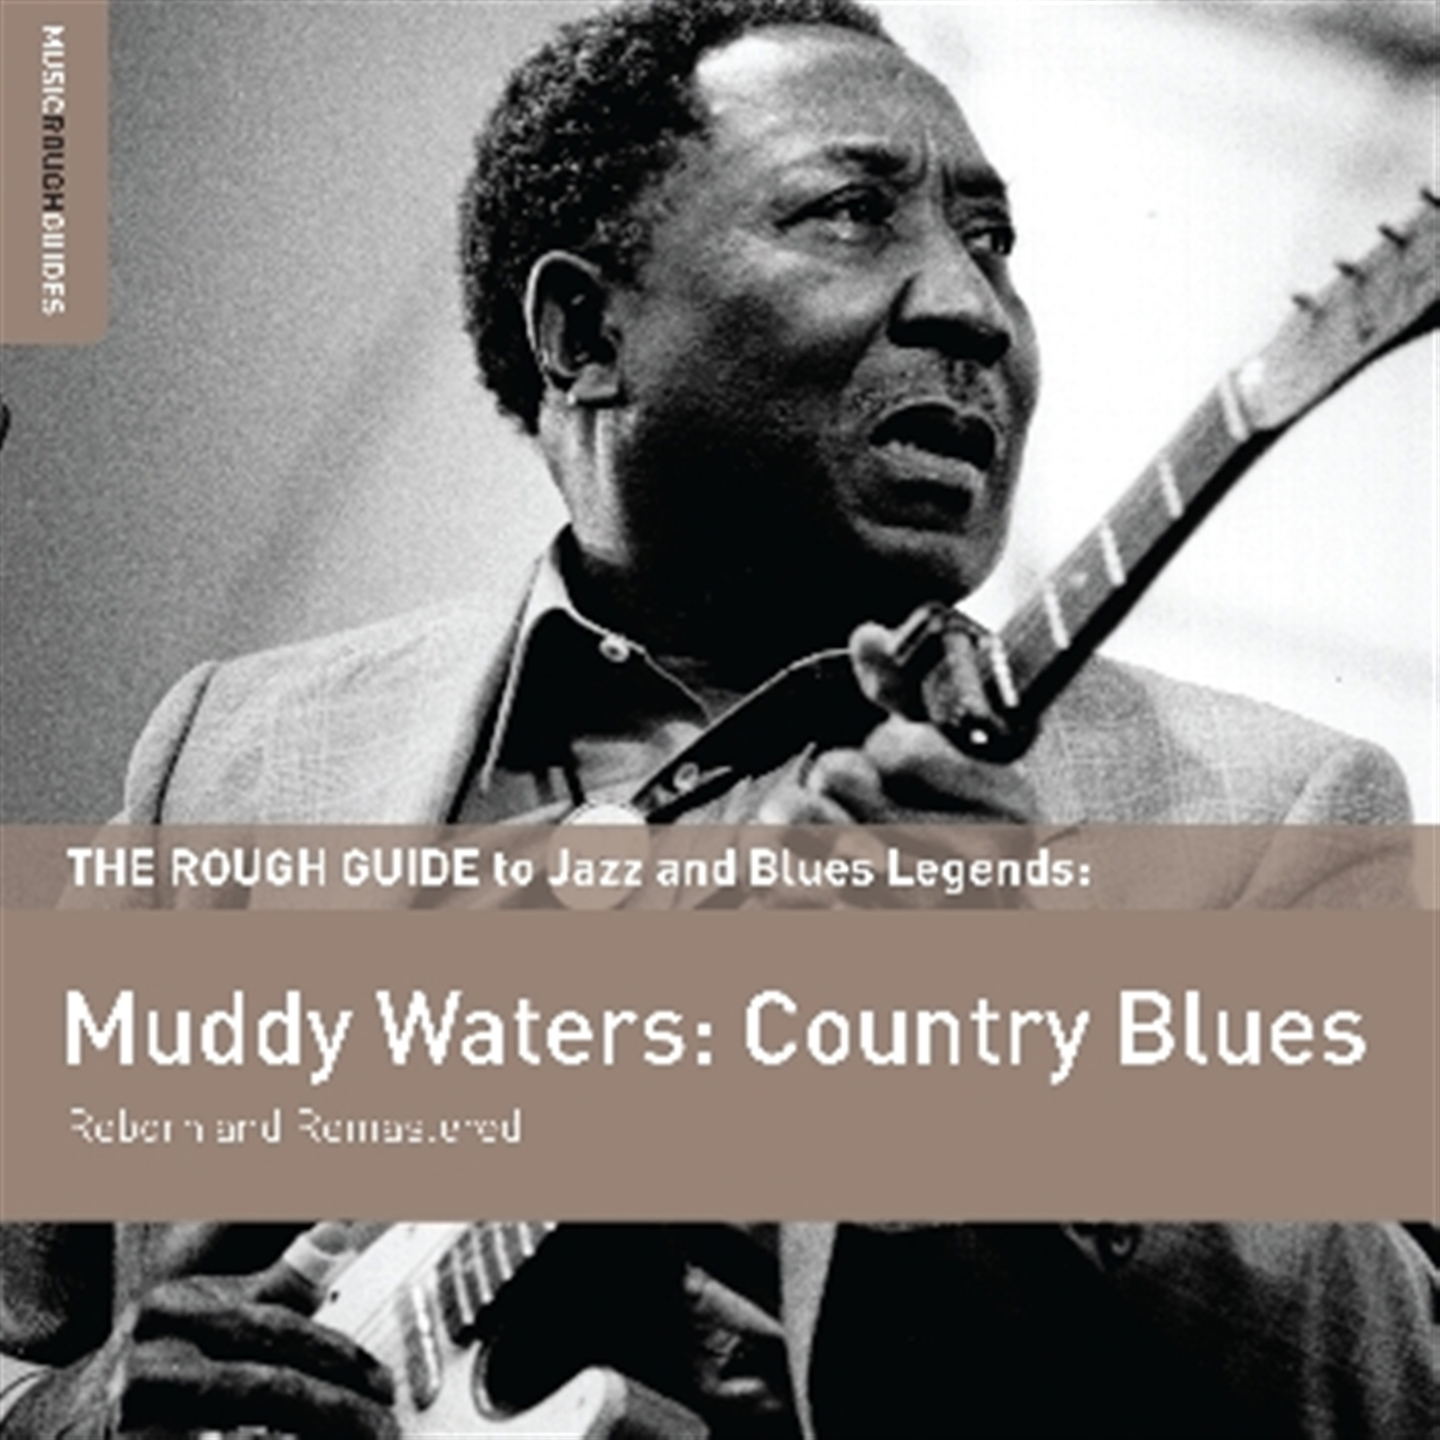 Waters Muddy - The Rough Guide To Muddy Waters: Country Blues [Special Edition] - Photo 1/1